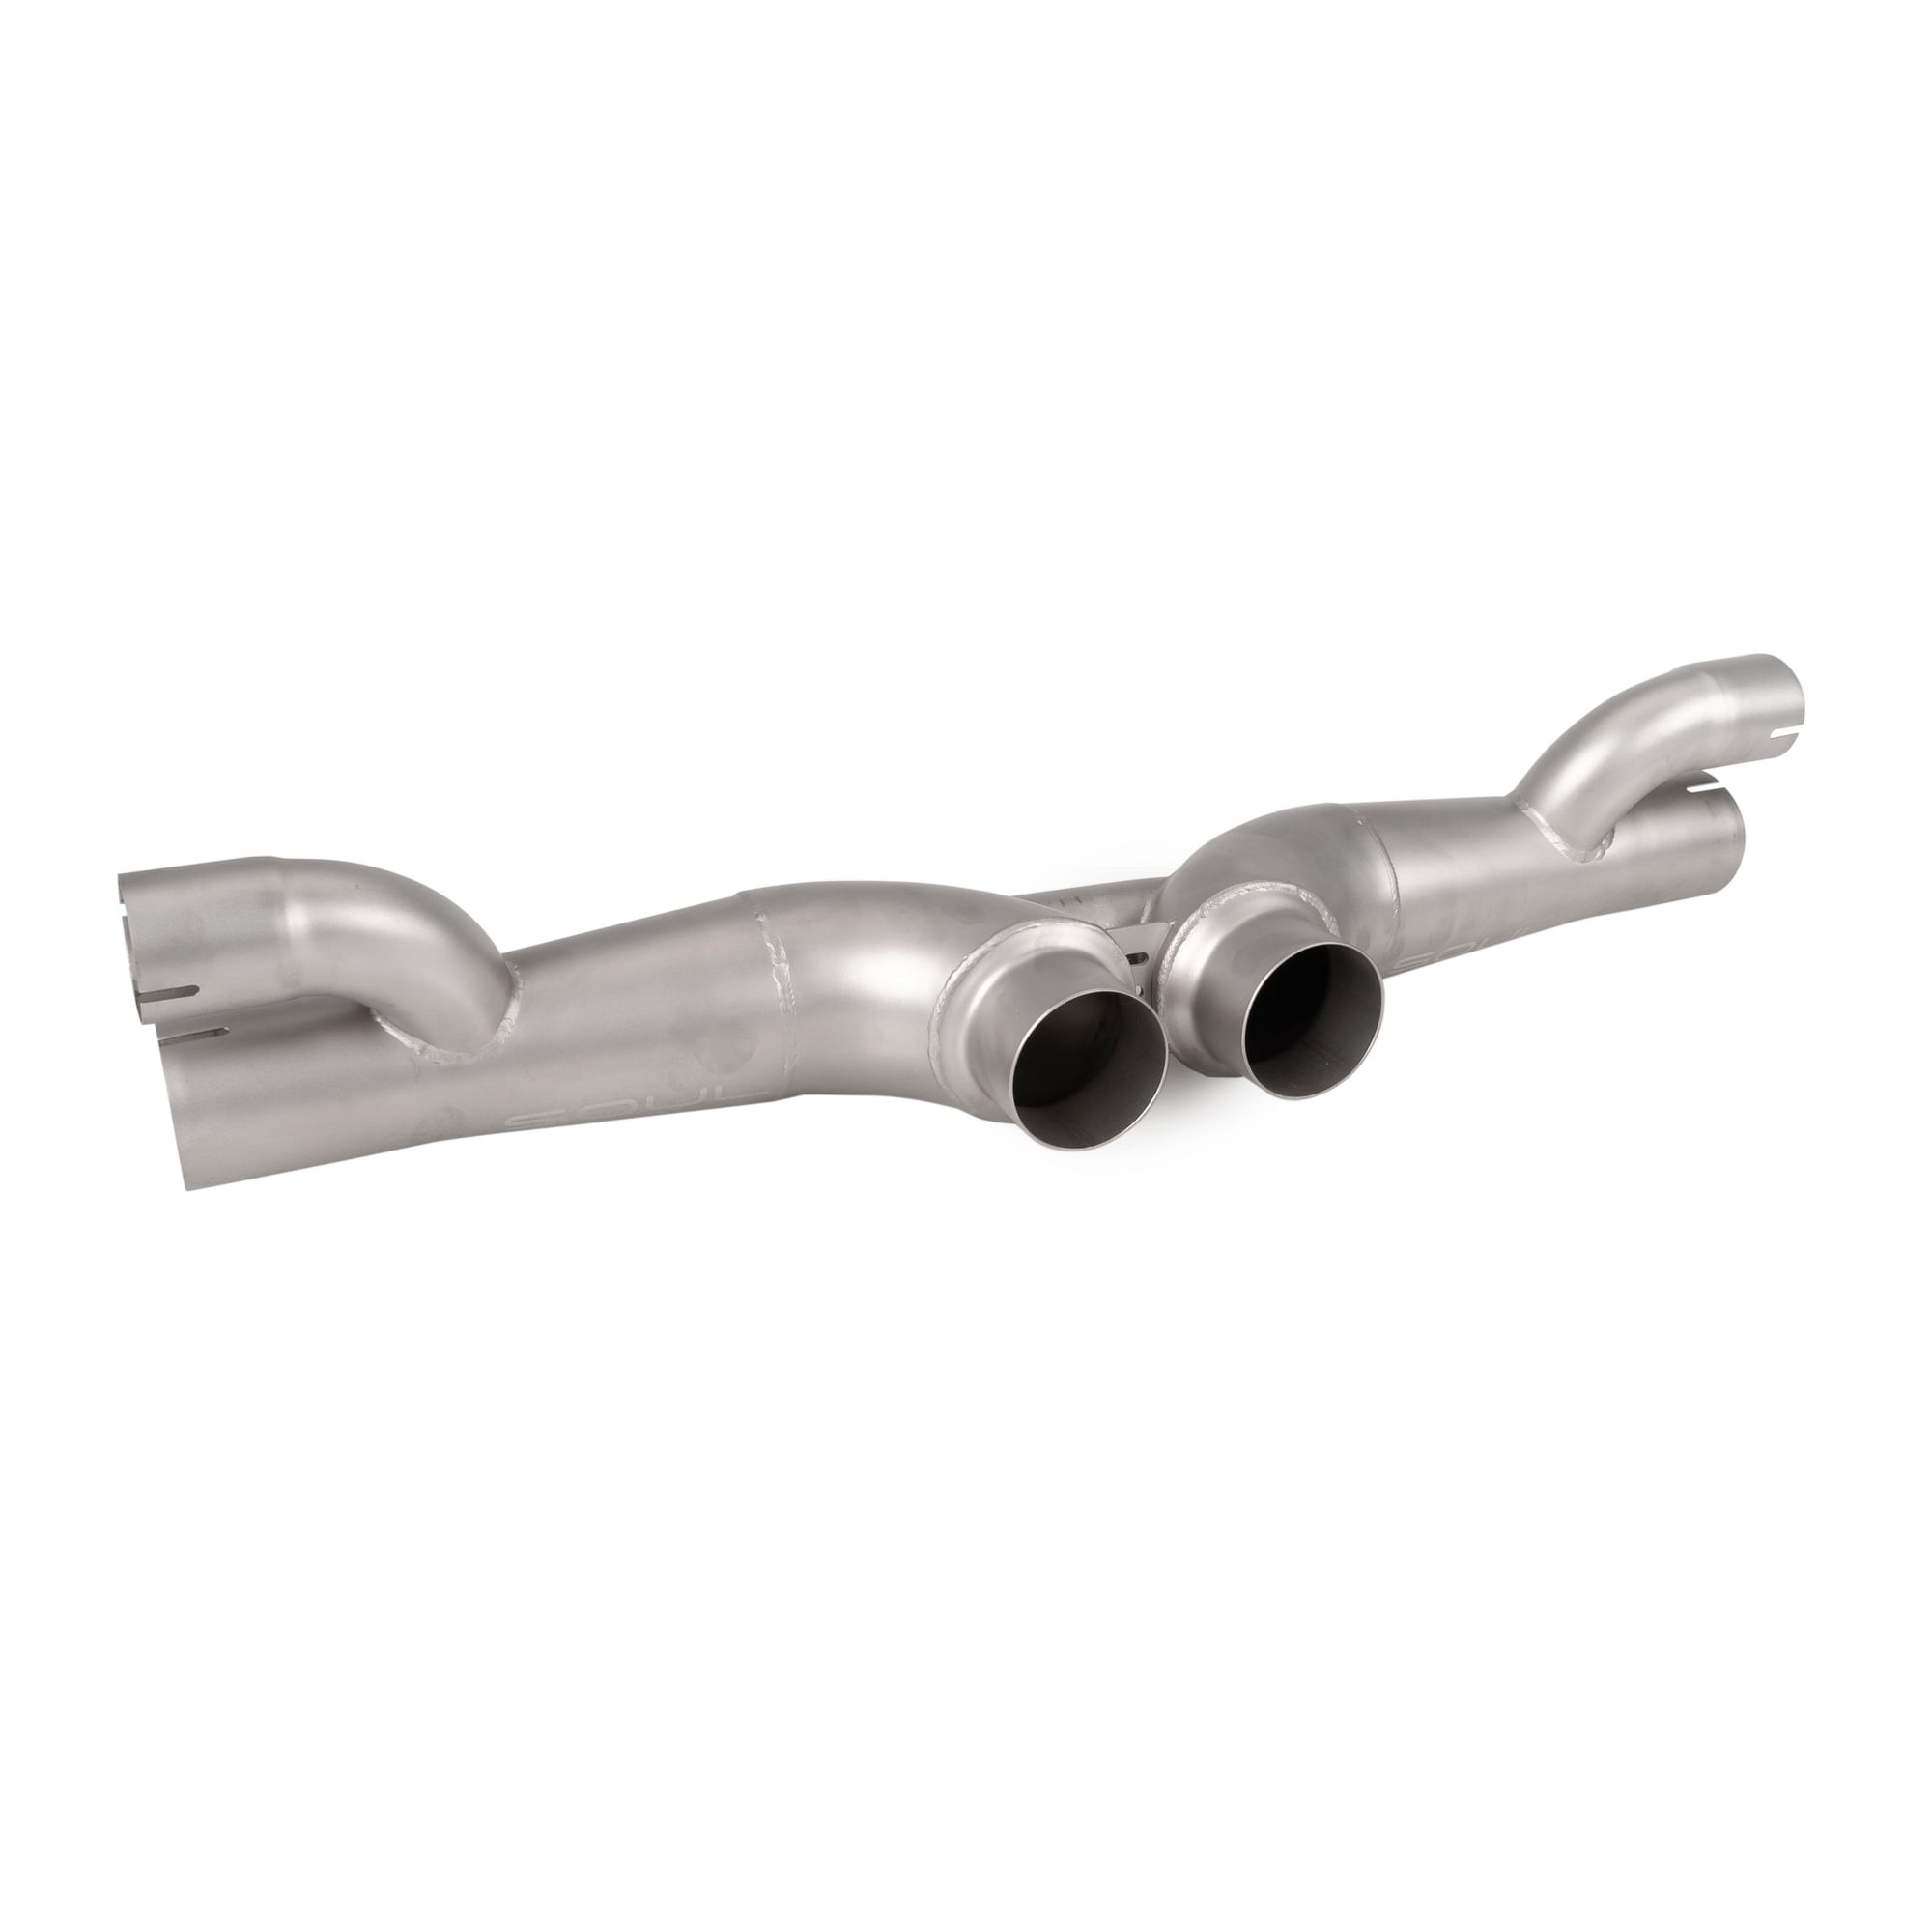 Engine - Electrical - Soul Muffler Bypass for 997 GT3/GT3RS - New - 2007 to 2011 Porsche 911 - Orlando, FL 32824, United States